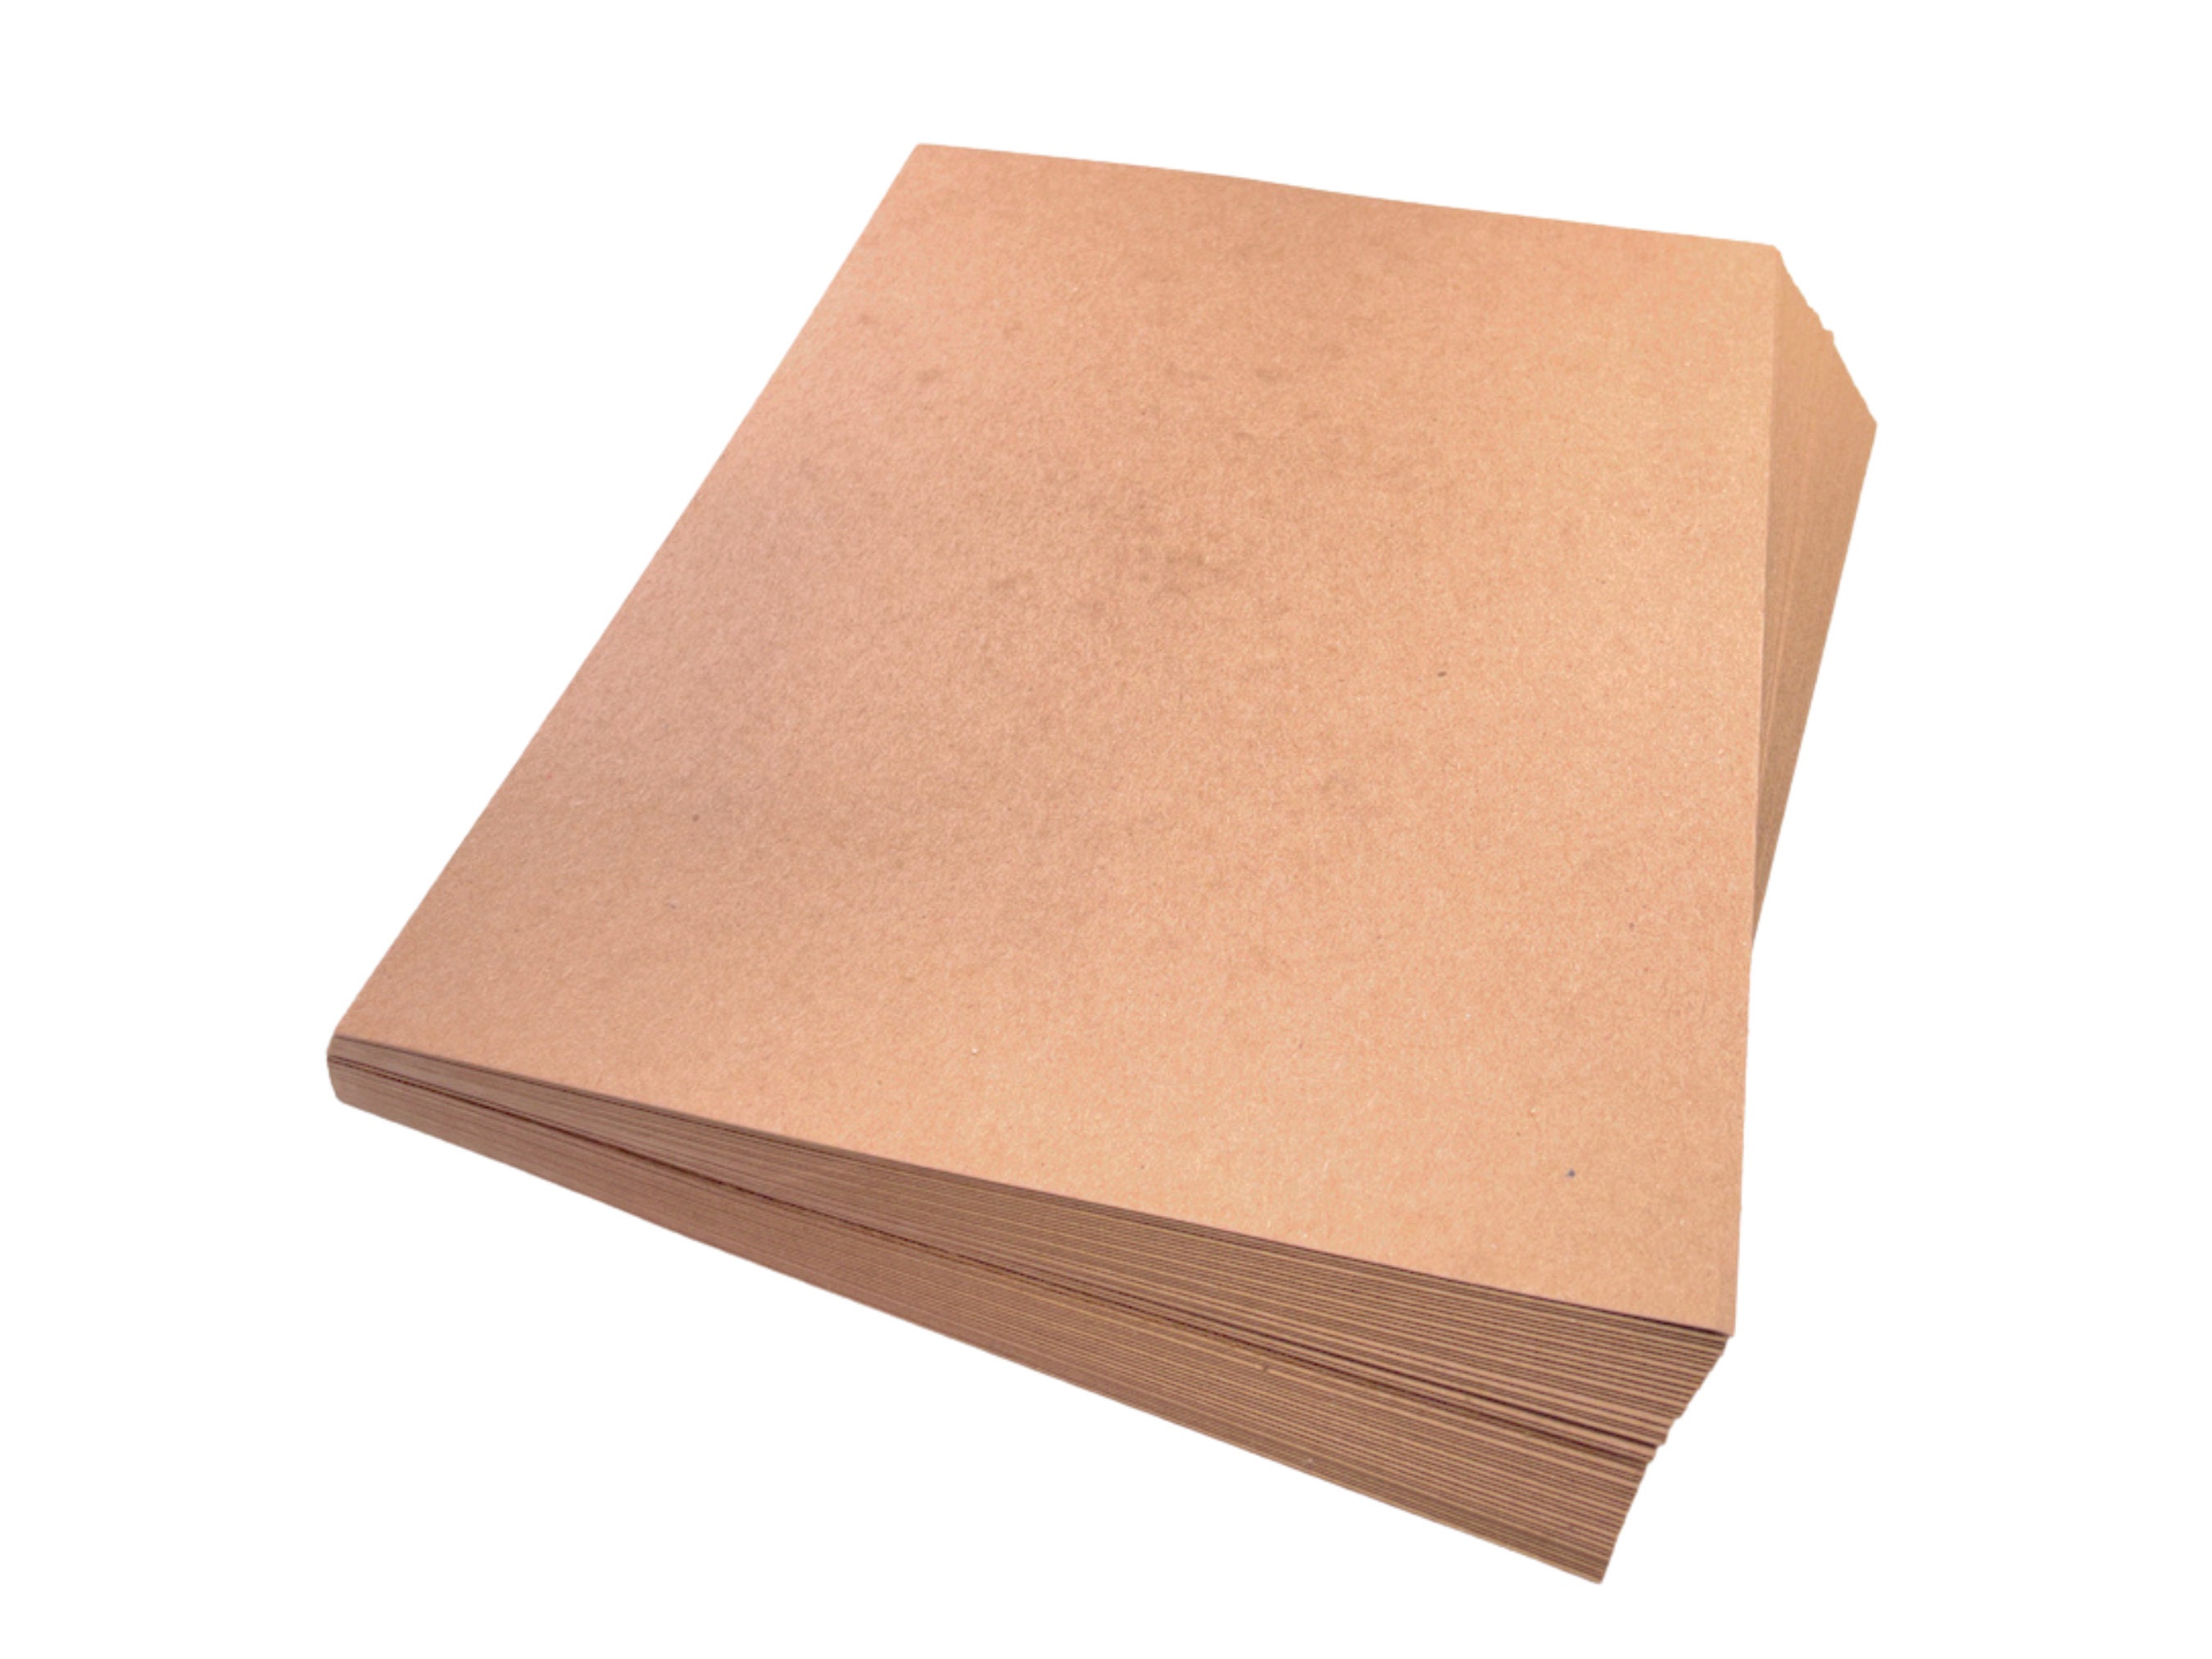 Custom Size Chip Board Sheets for Binding, Crafts, + More